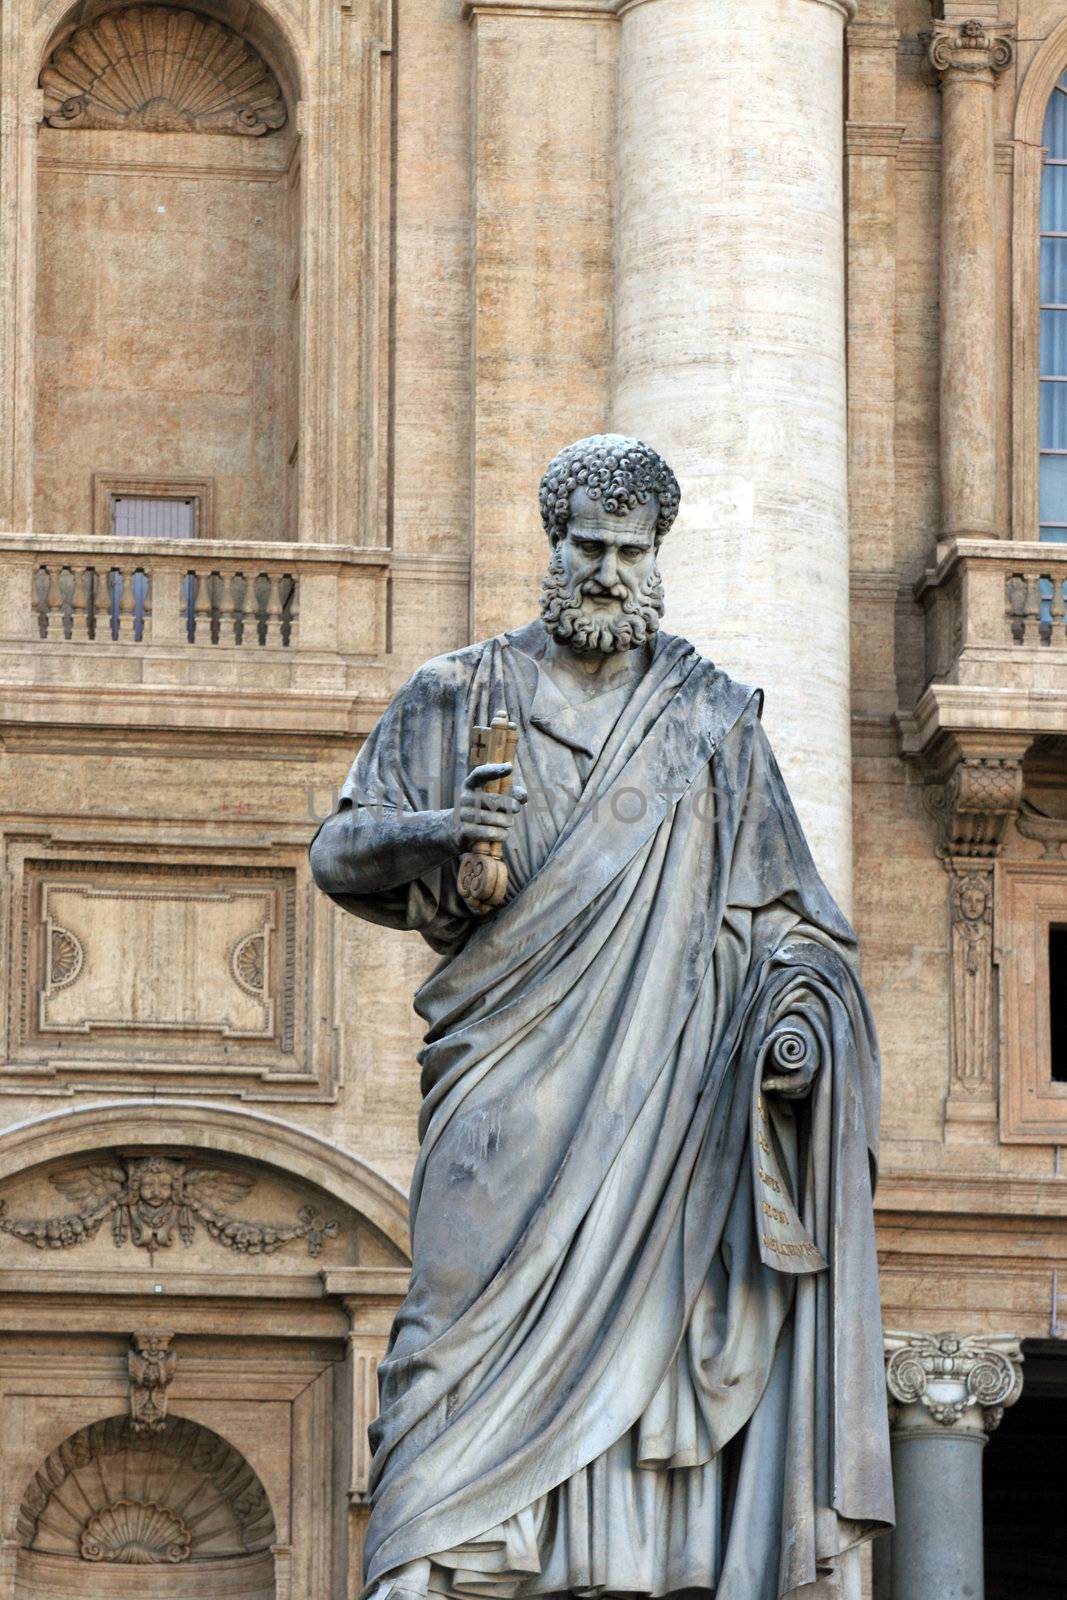 St. Peter at the Vatican by keki